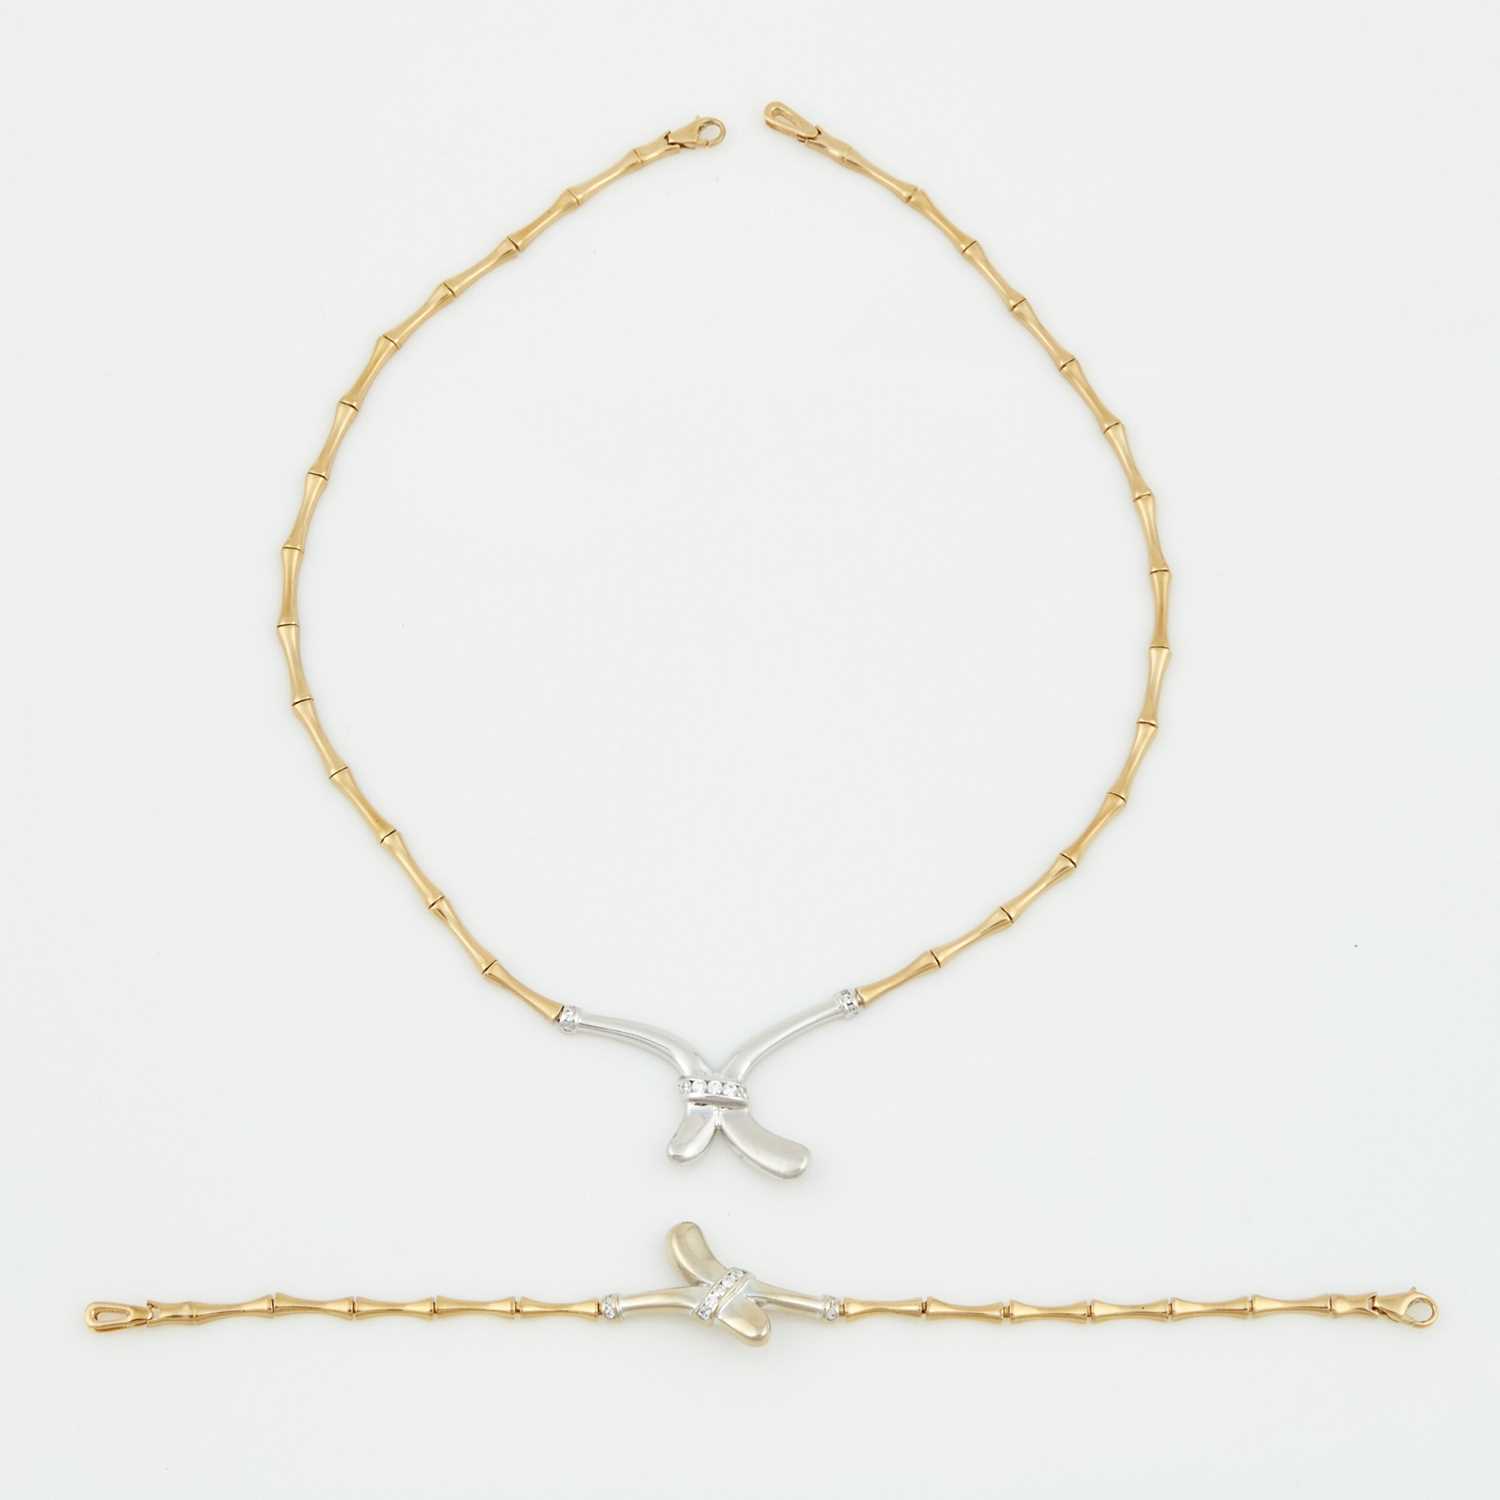 Lot 58 - Gold and Stone Necklace and Flexible Bracelet, 14K 19 dwt. all